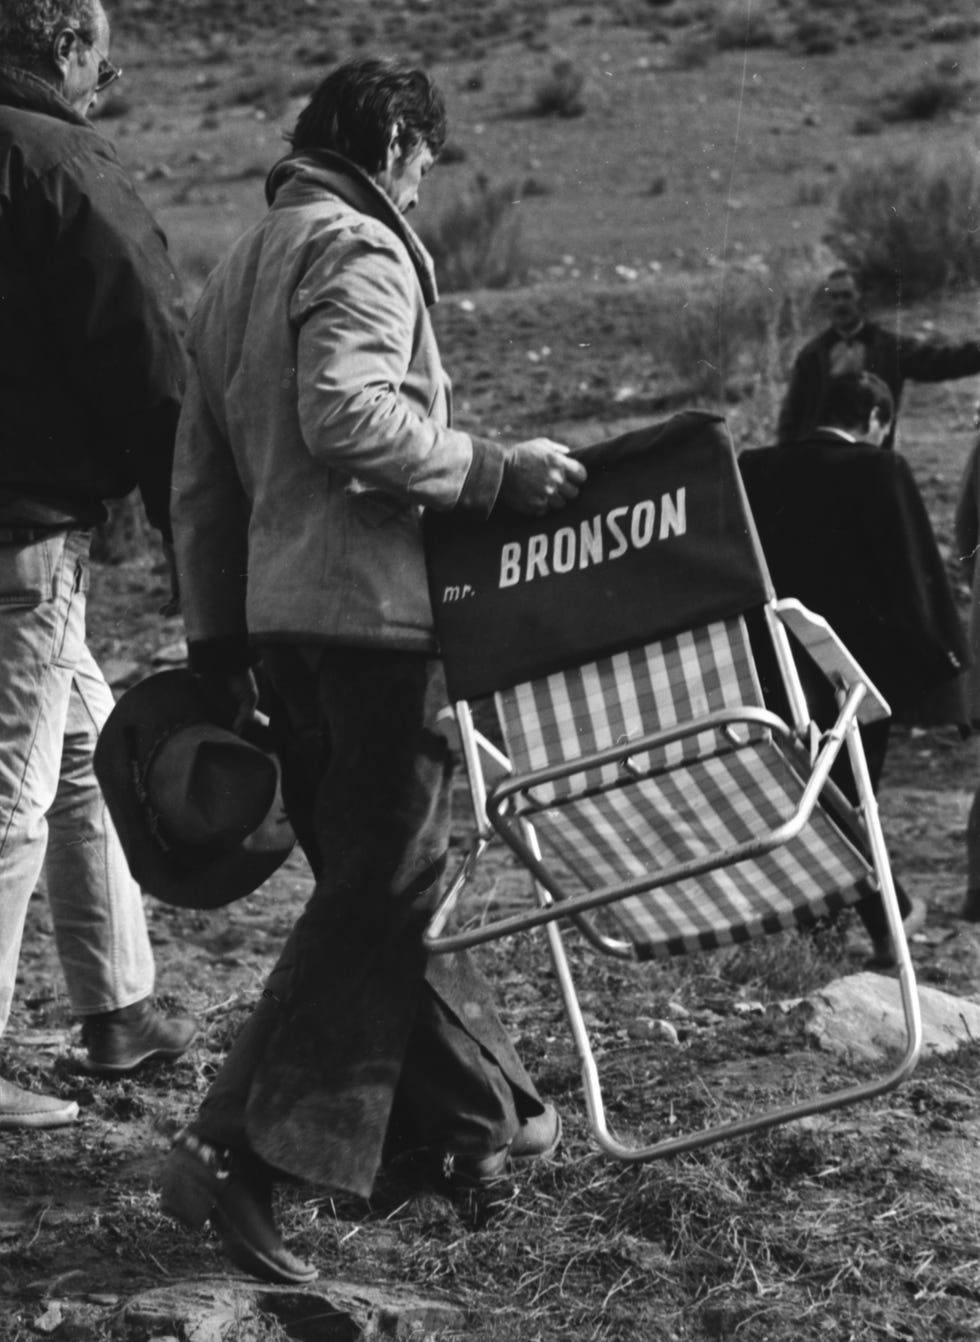 IMAGENES DE CINE Charles-bronson-during-the-filming-of-the-movie-wild-horses-news-photo-1635674101